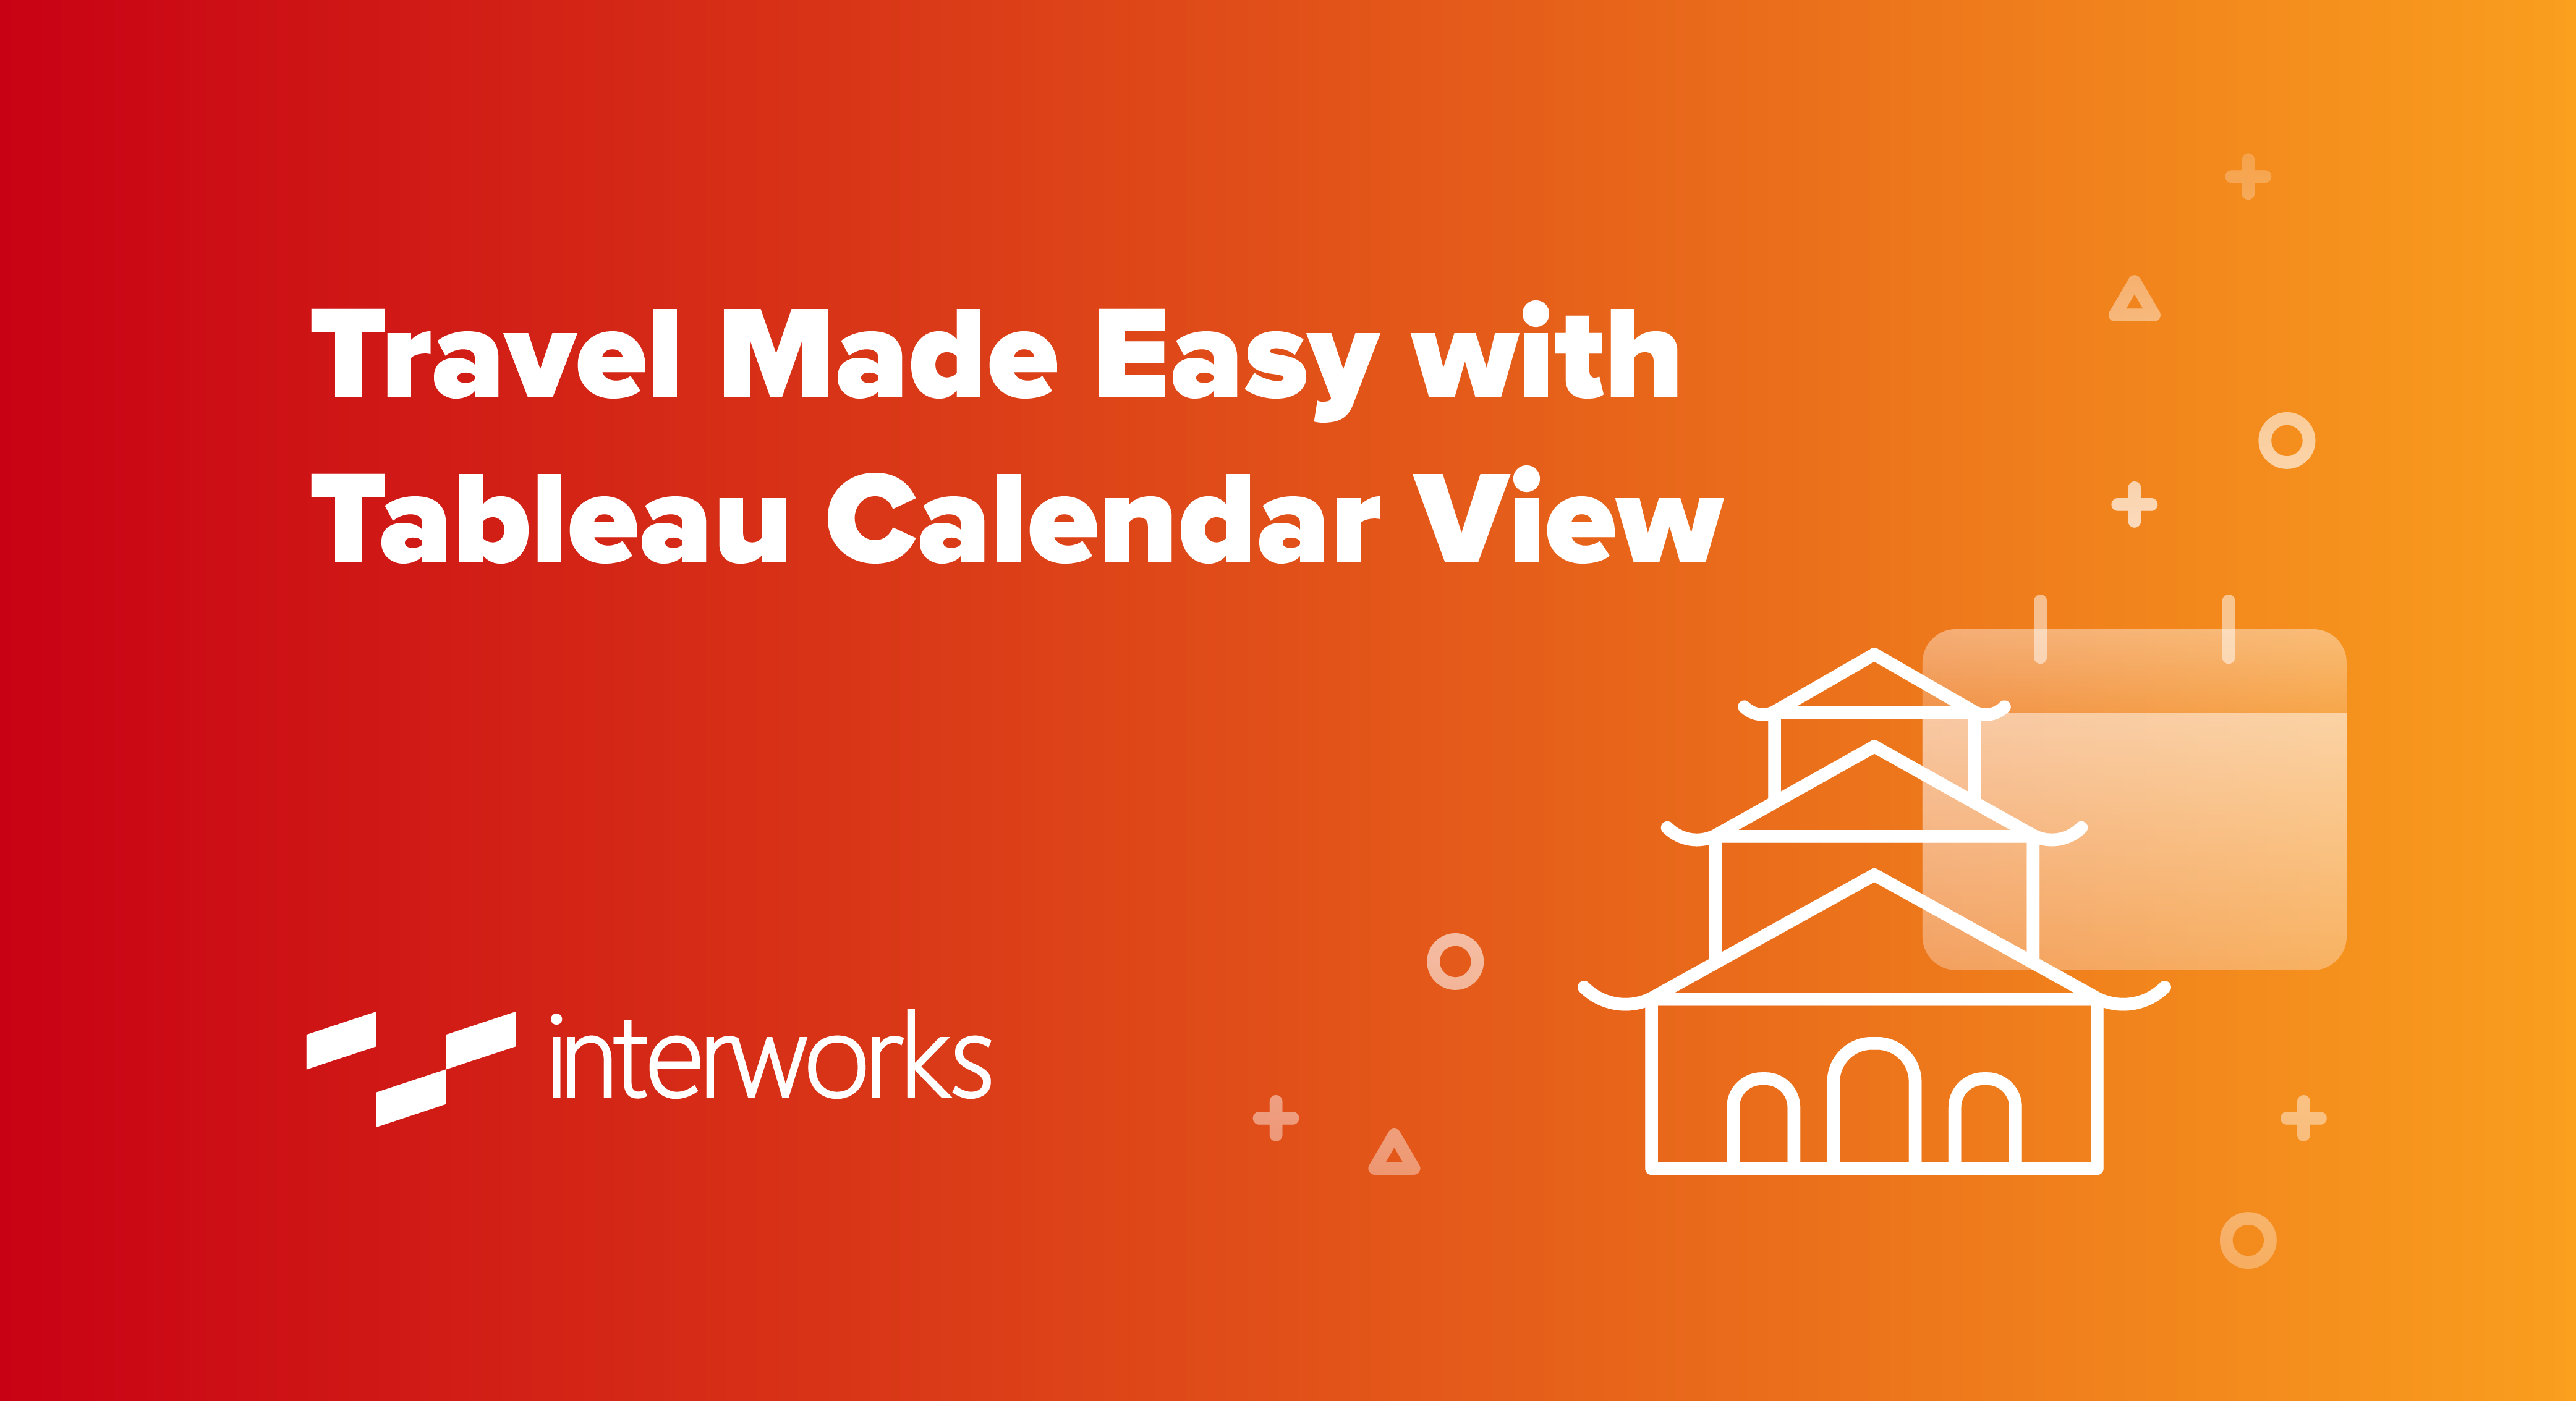 Travel Made Easy with Tableau Calendar View